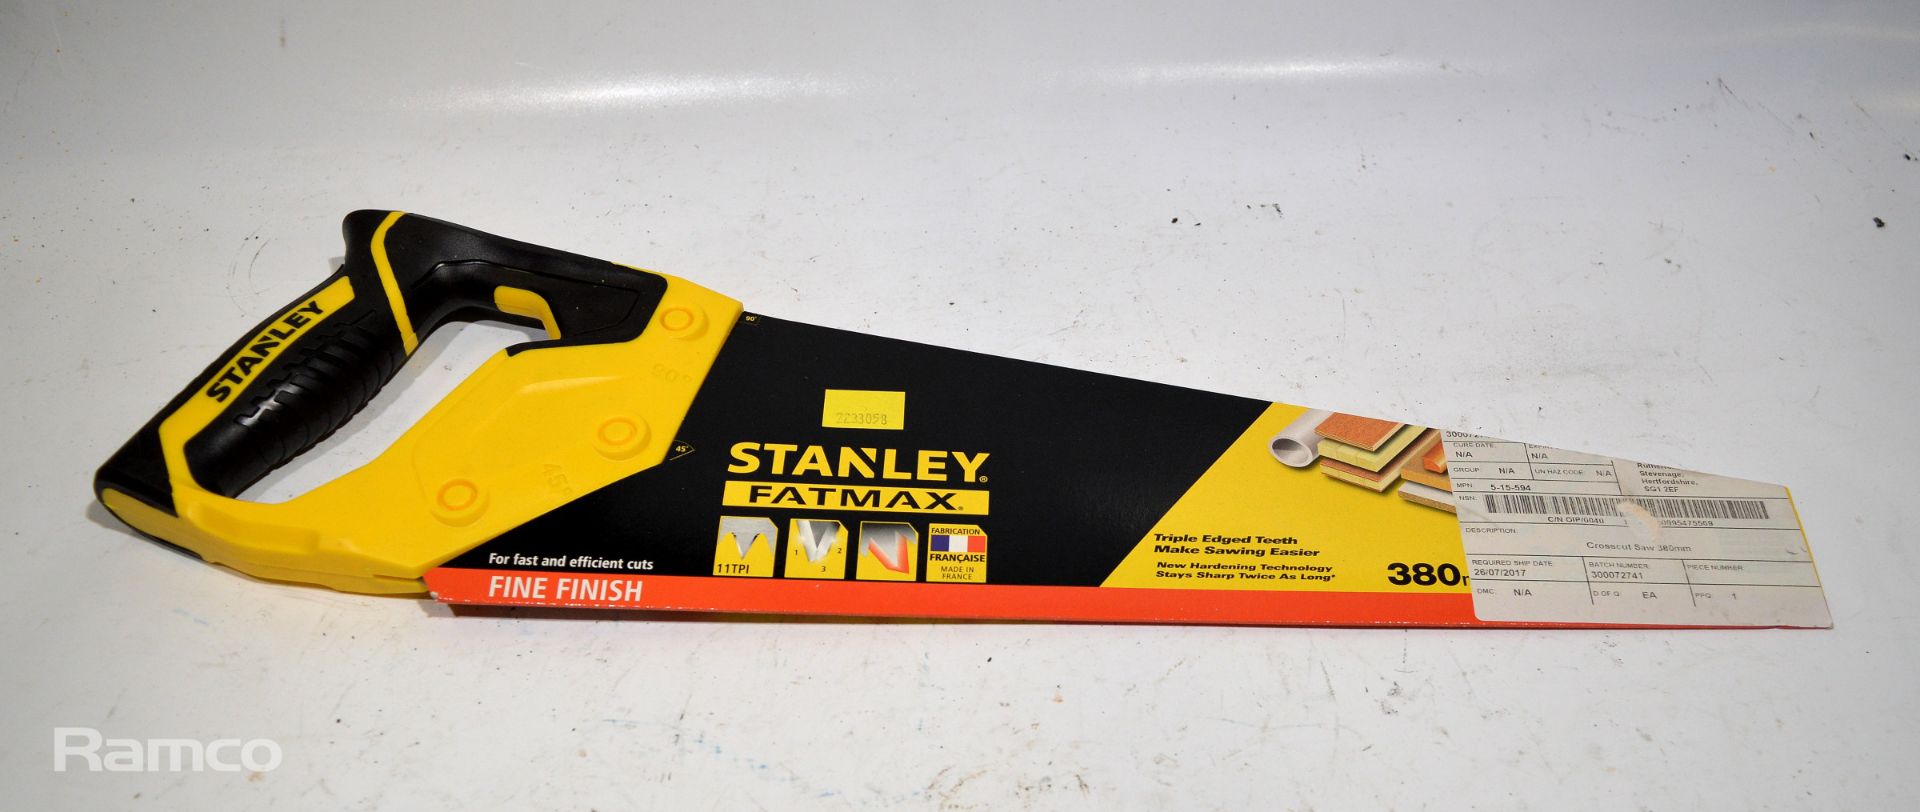 5x Stanley Fatmax hand saws - 380mm - Image 2 of 3